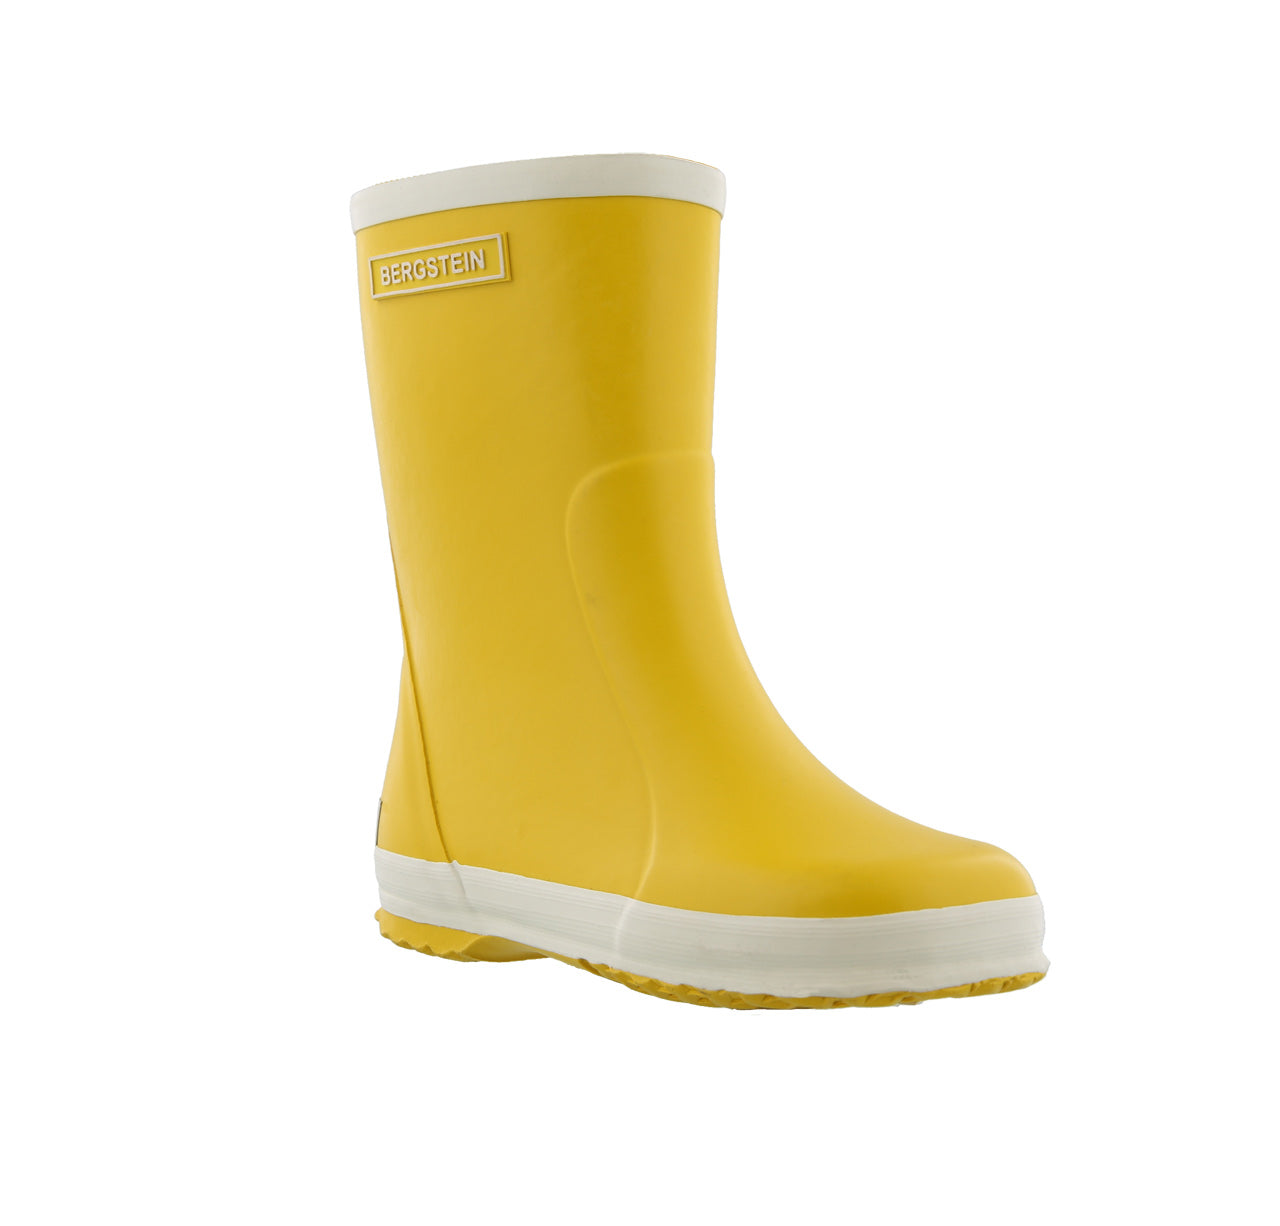 Natural Rubber Gumboots - Yellow (21-35)